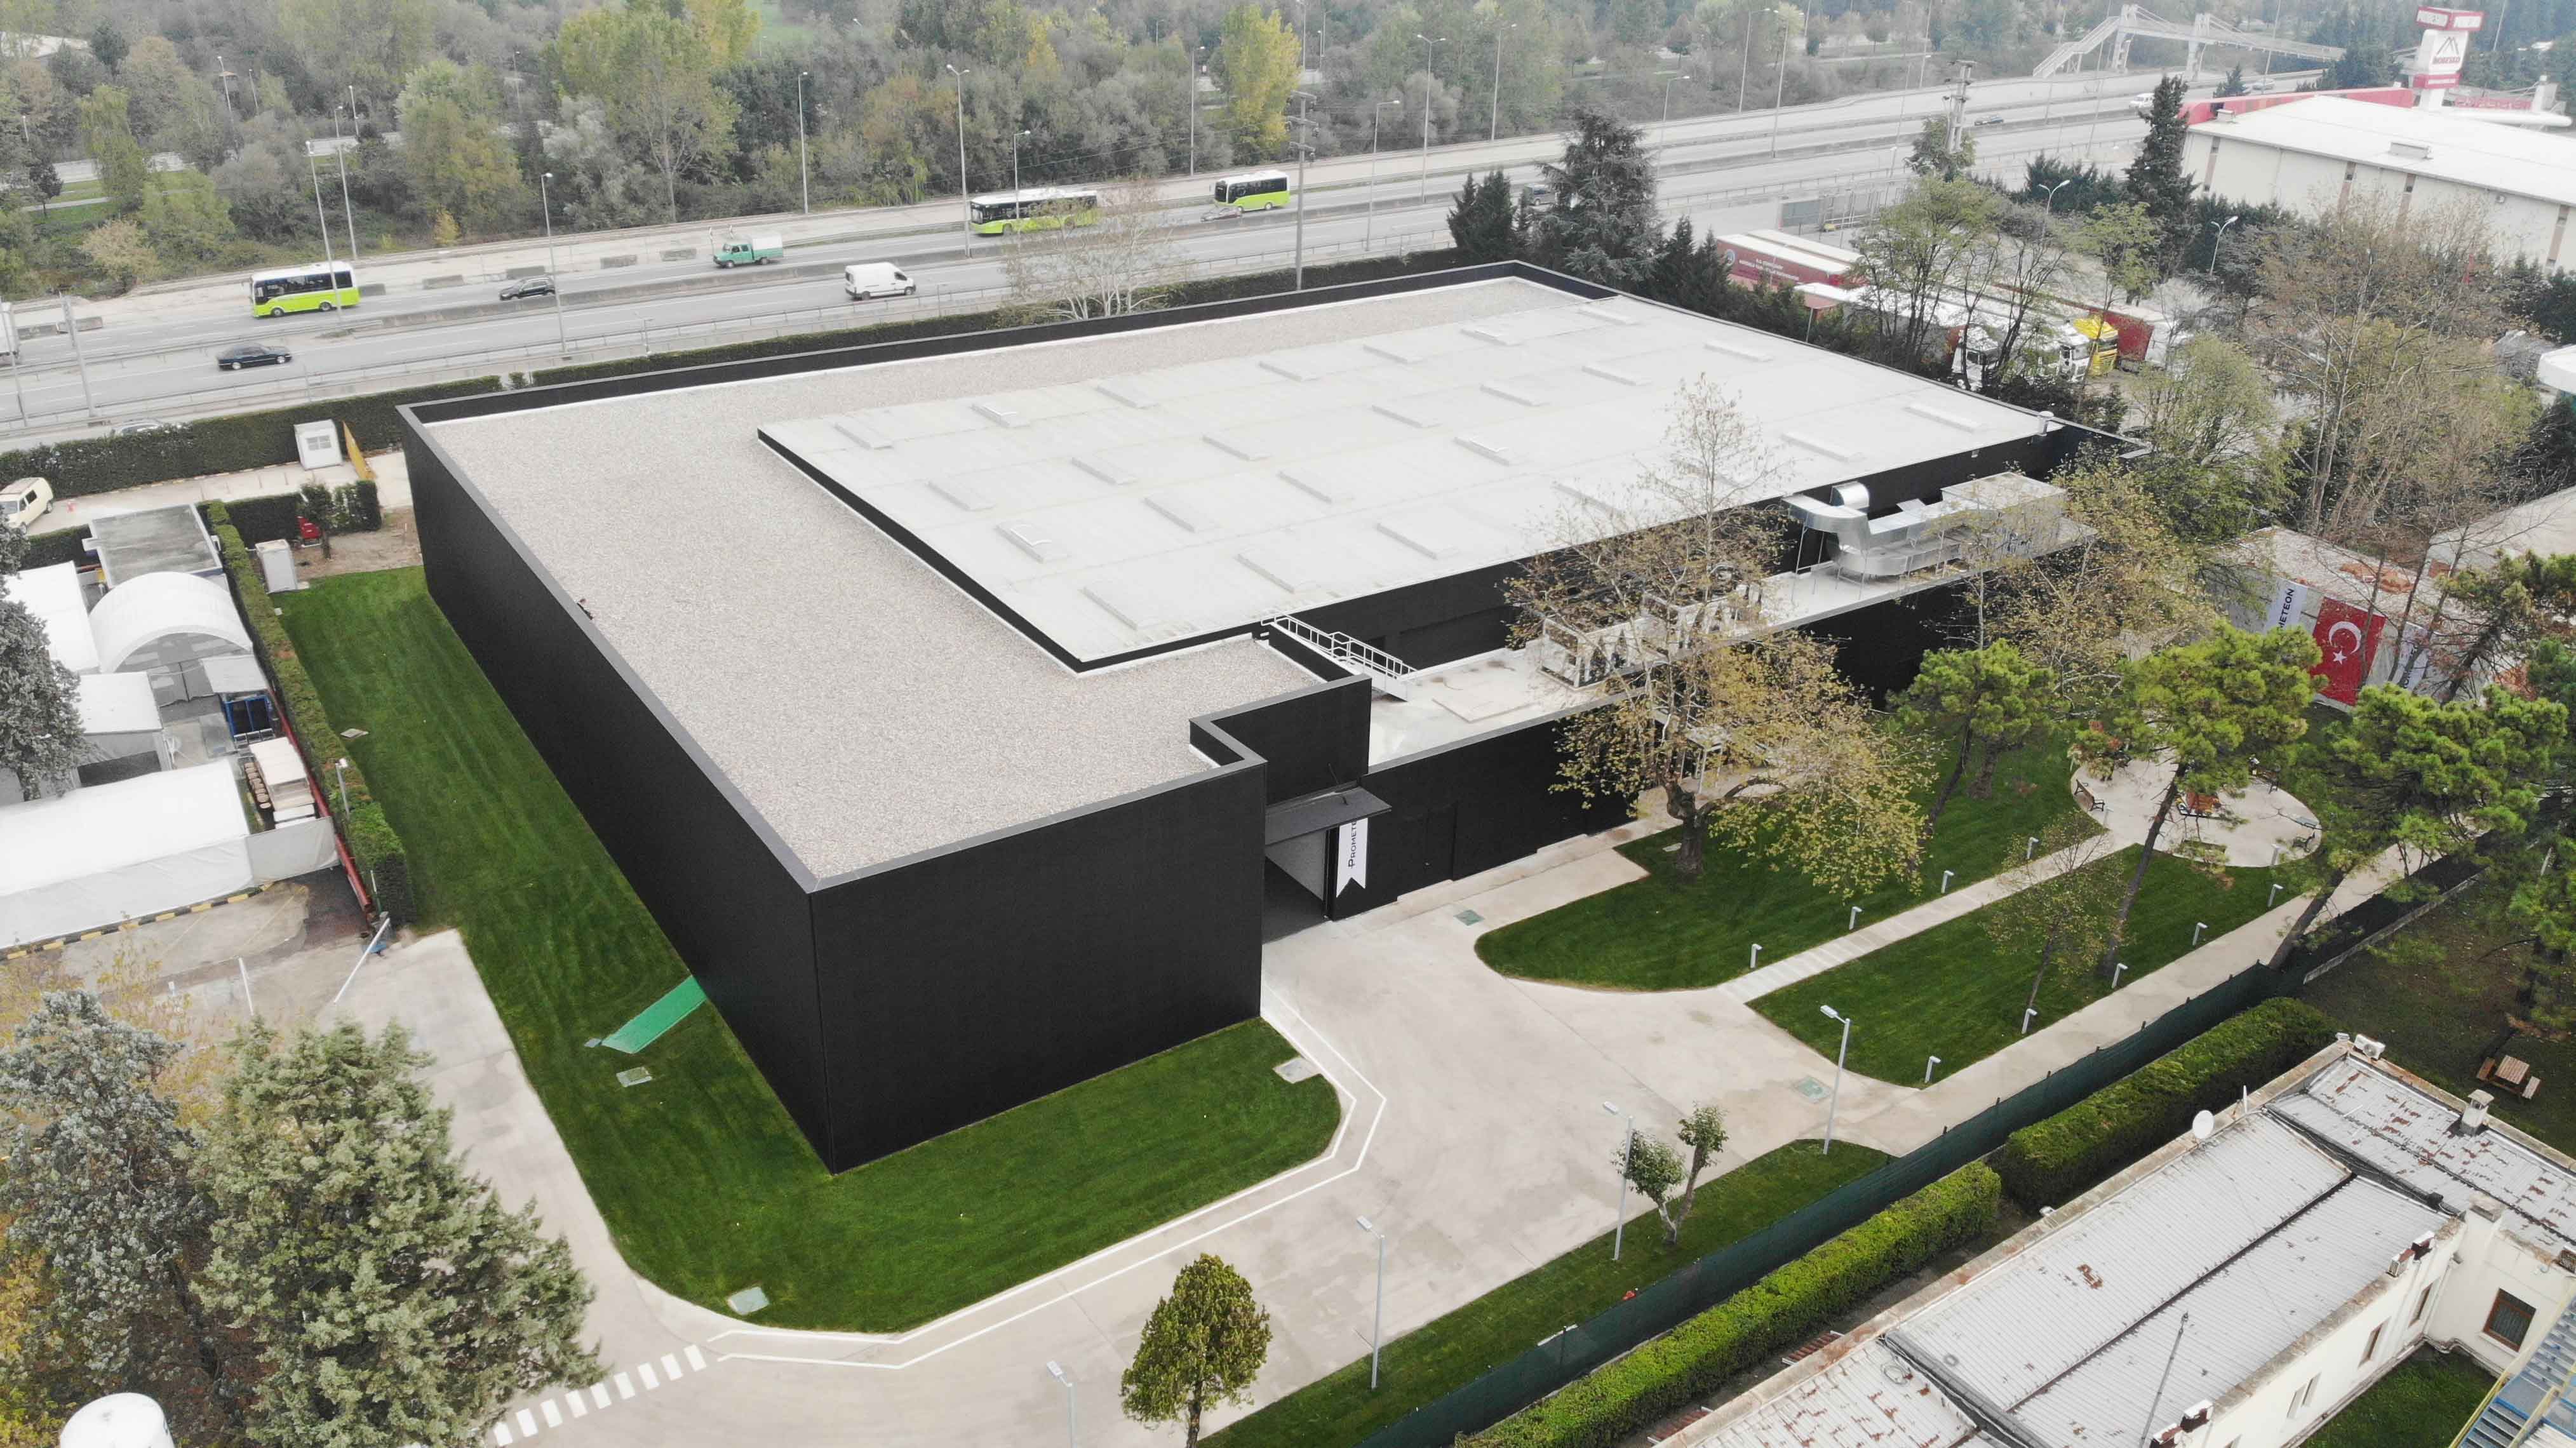 PROMETEON TYRE GROUP OPENS  A NEW R&D CENTRE IN TURKEY WITH A 15 MILLION DOLLARS  INVESTMENT